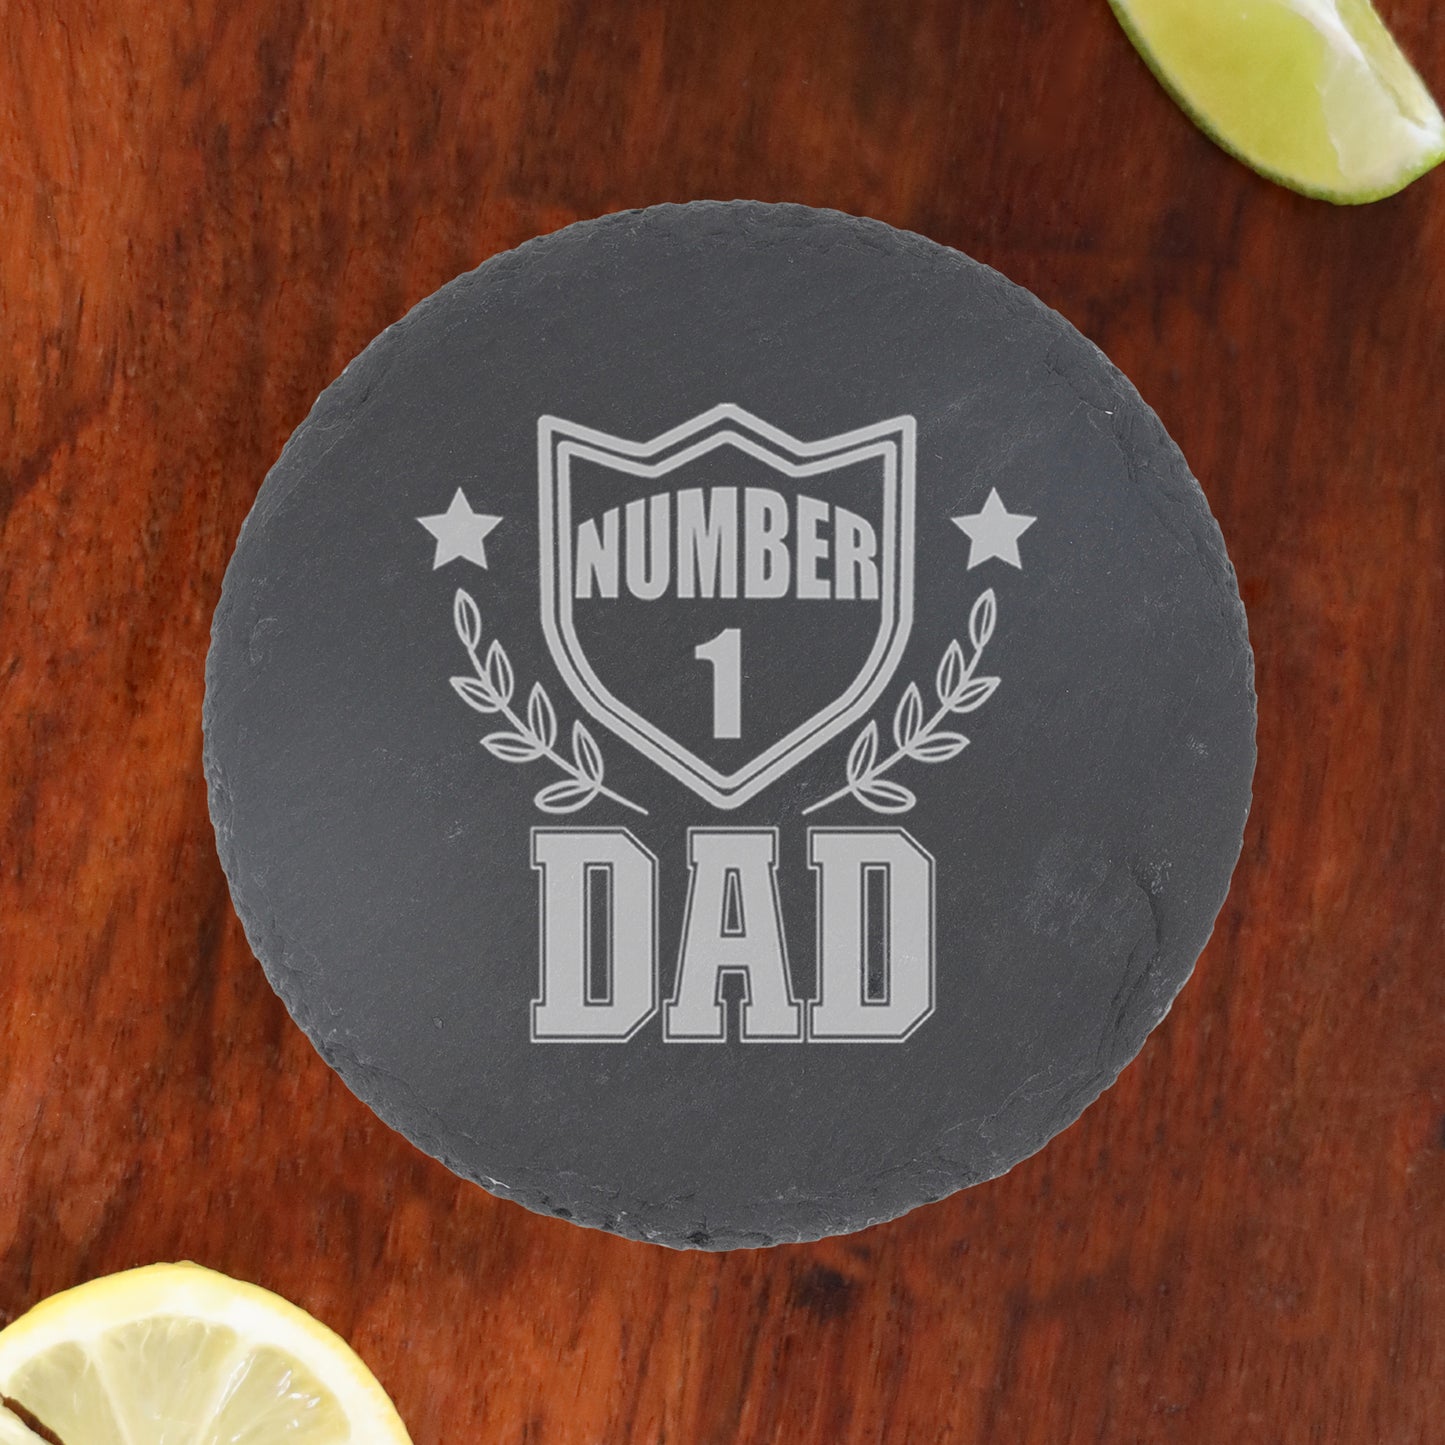 Engraved "Number 1 Dad" Whisky Glass and/or Coaster Set  - Always Looking Good - Round Coaster Only  